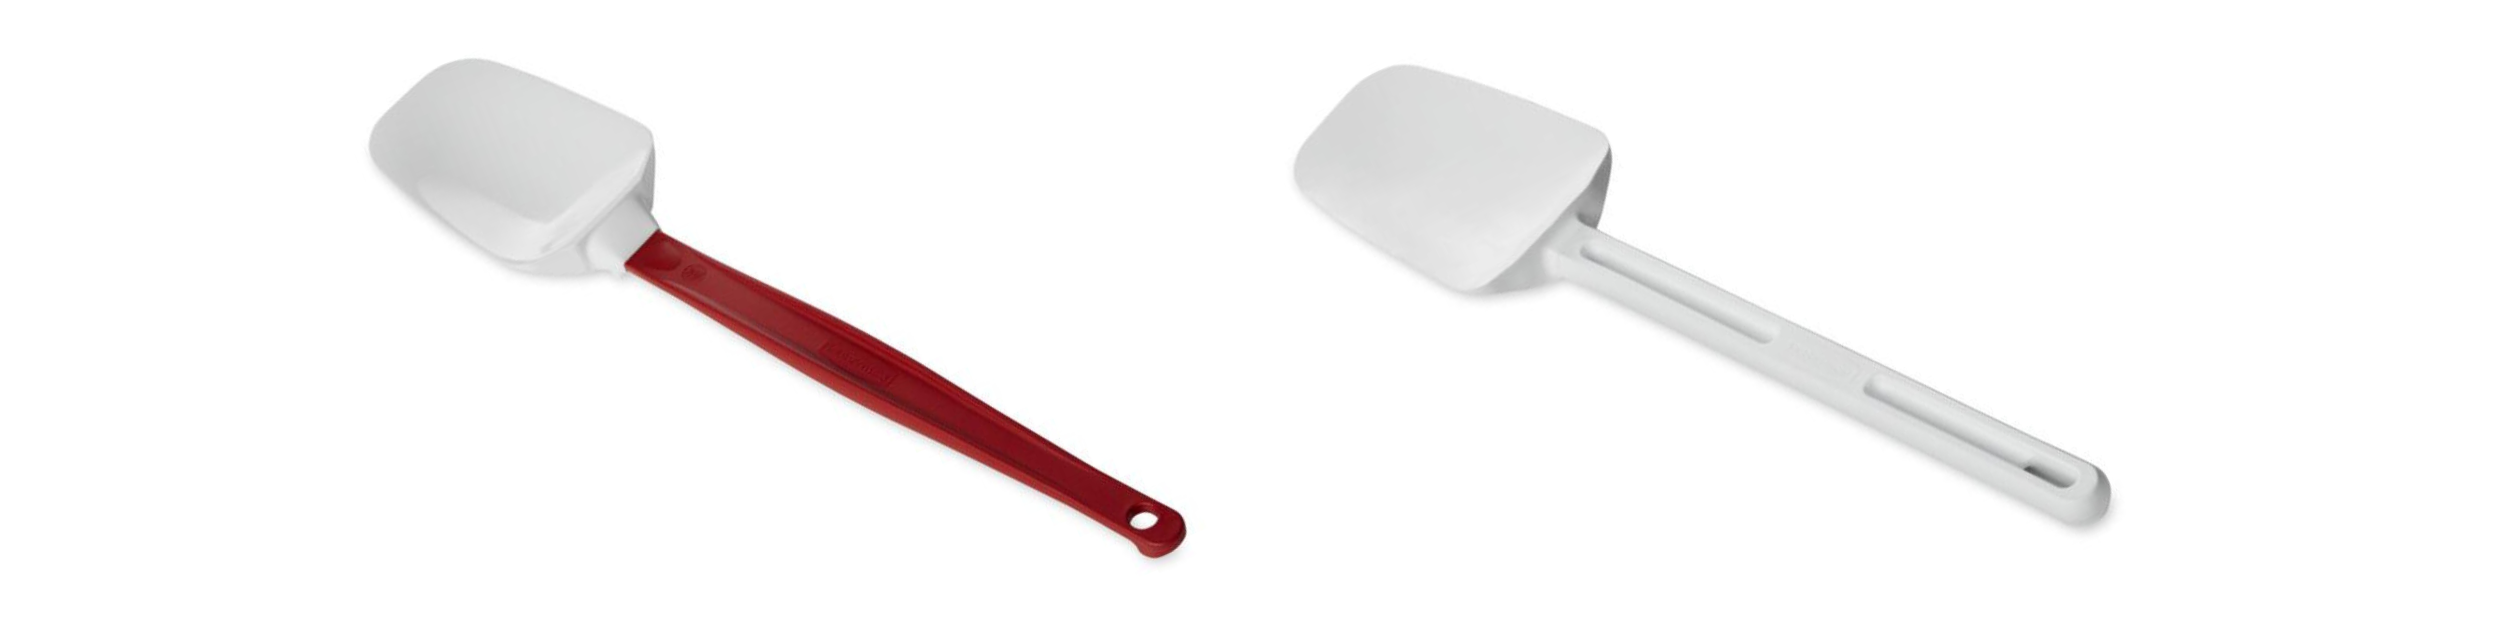 Types of Spatulas Buying Guide: Uses, Pros & Cons, & More